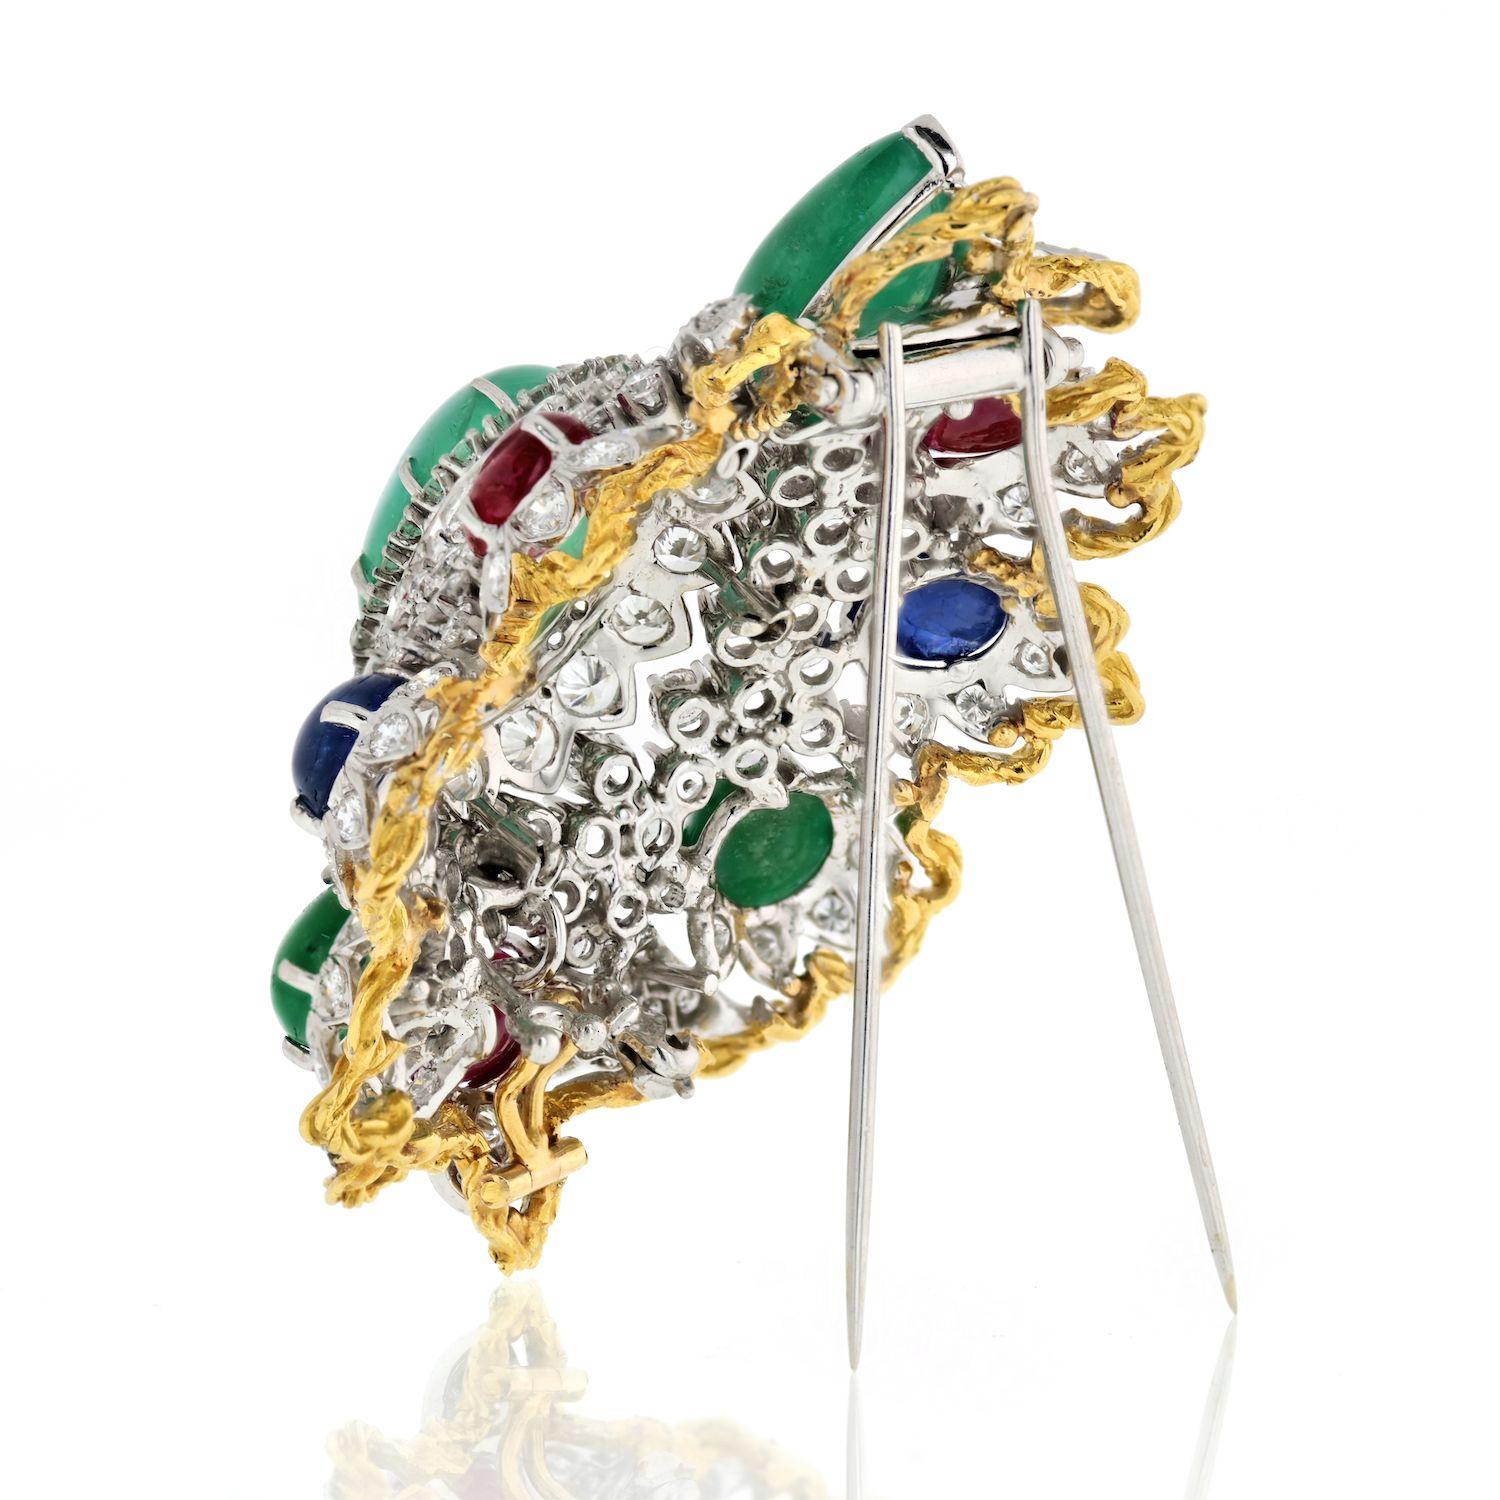 Modern Diamond And Gemstones Heraldic Brooch from 1970's For Sale